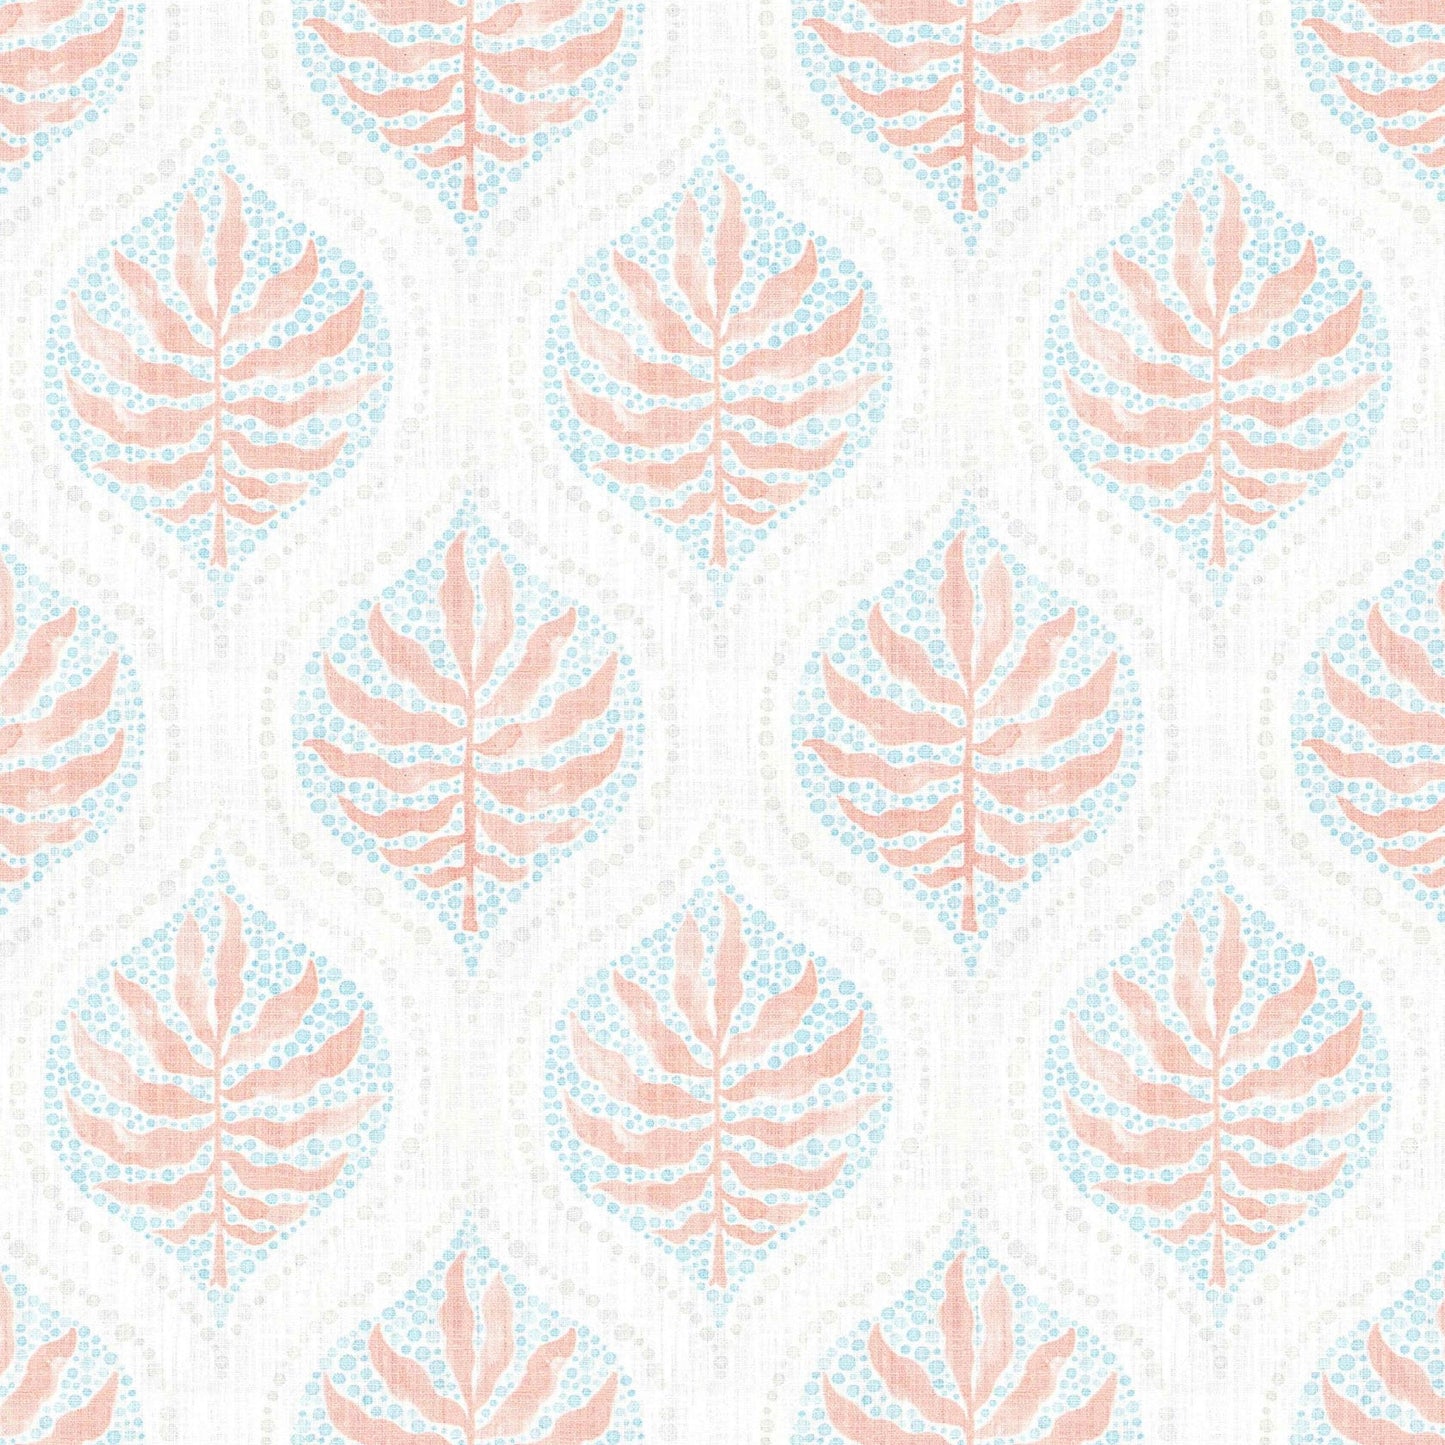 Tailored Tier Cafe Curtain Panels Pair in Airlie Coral Ogee Floral Watercolor - with Blue, Gray